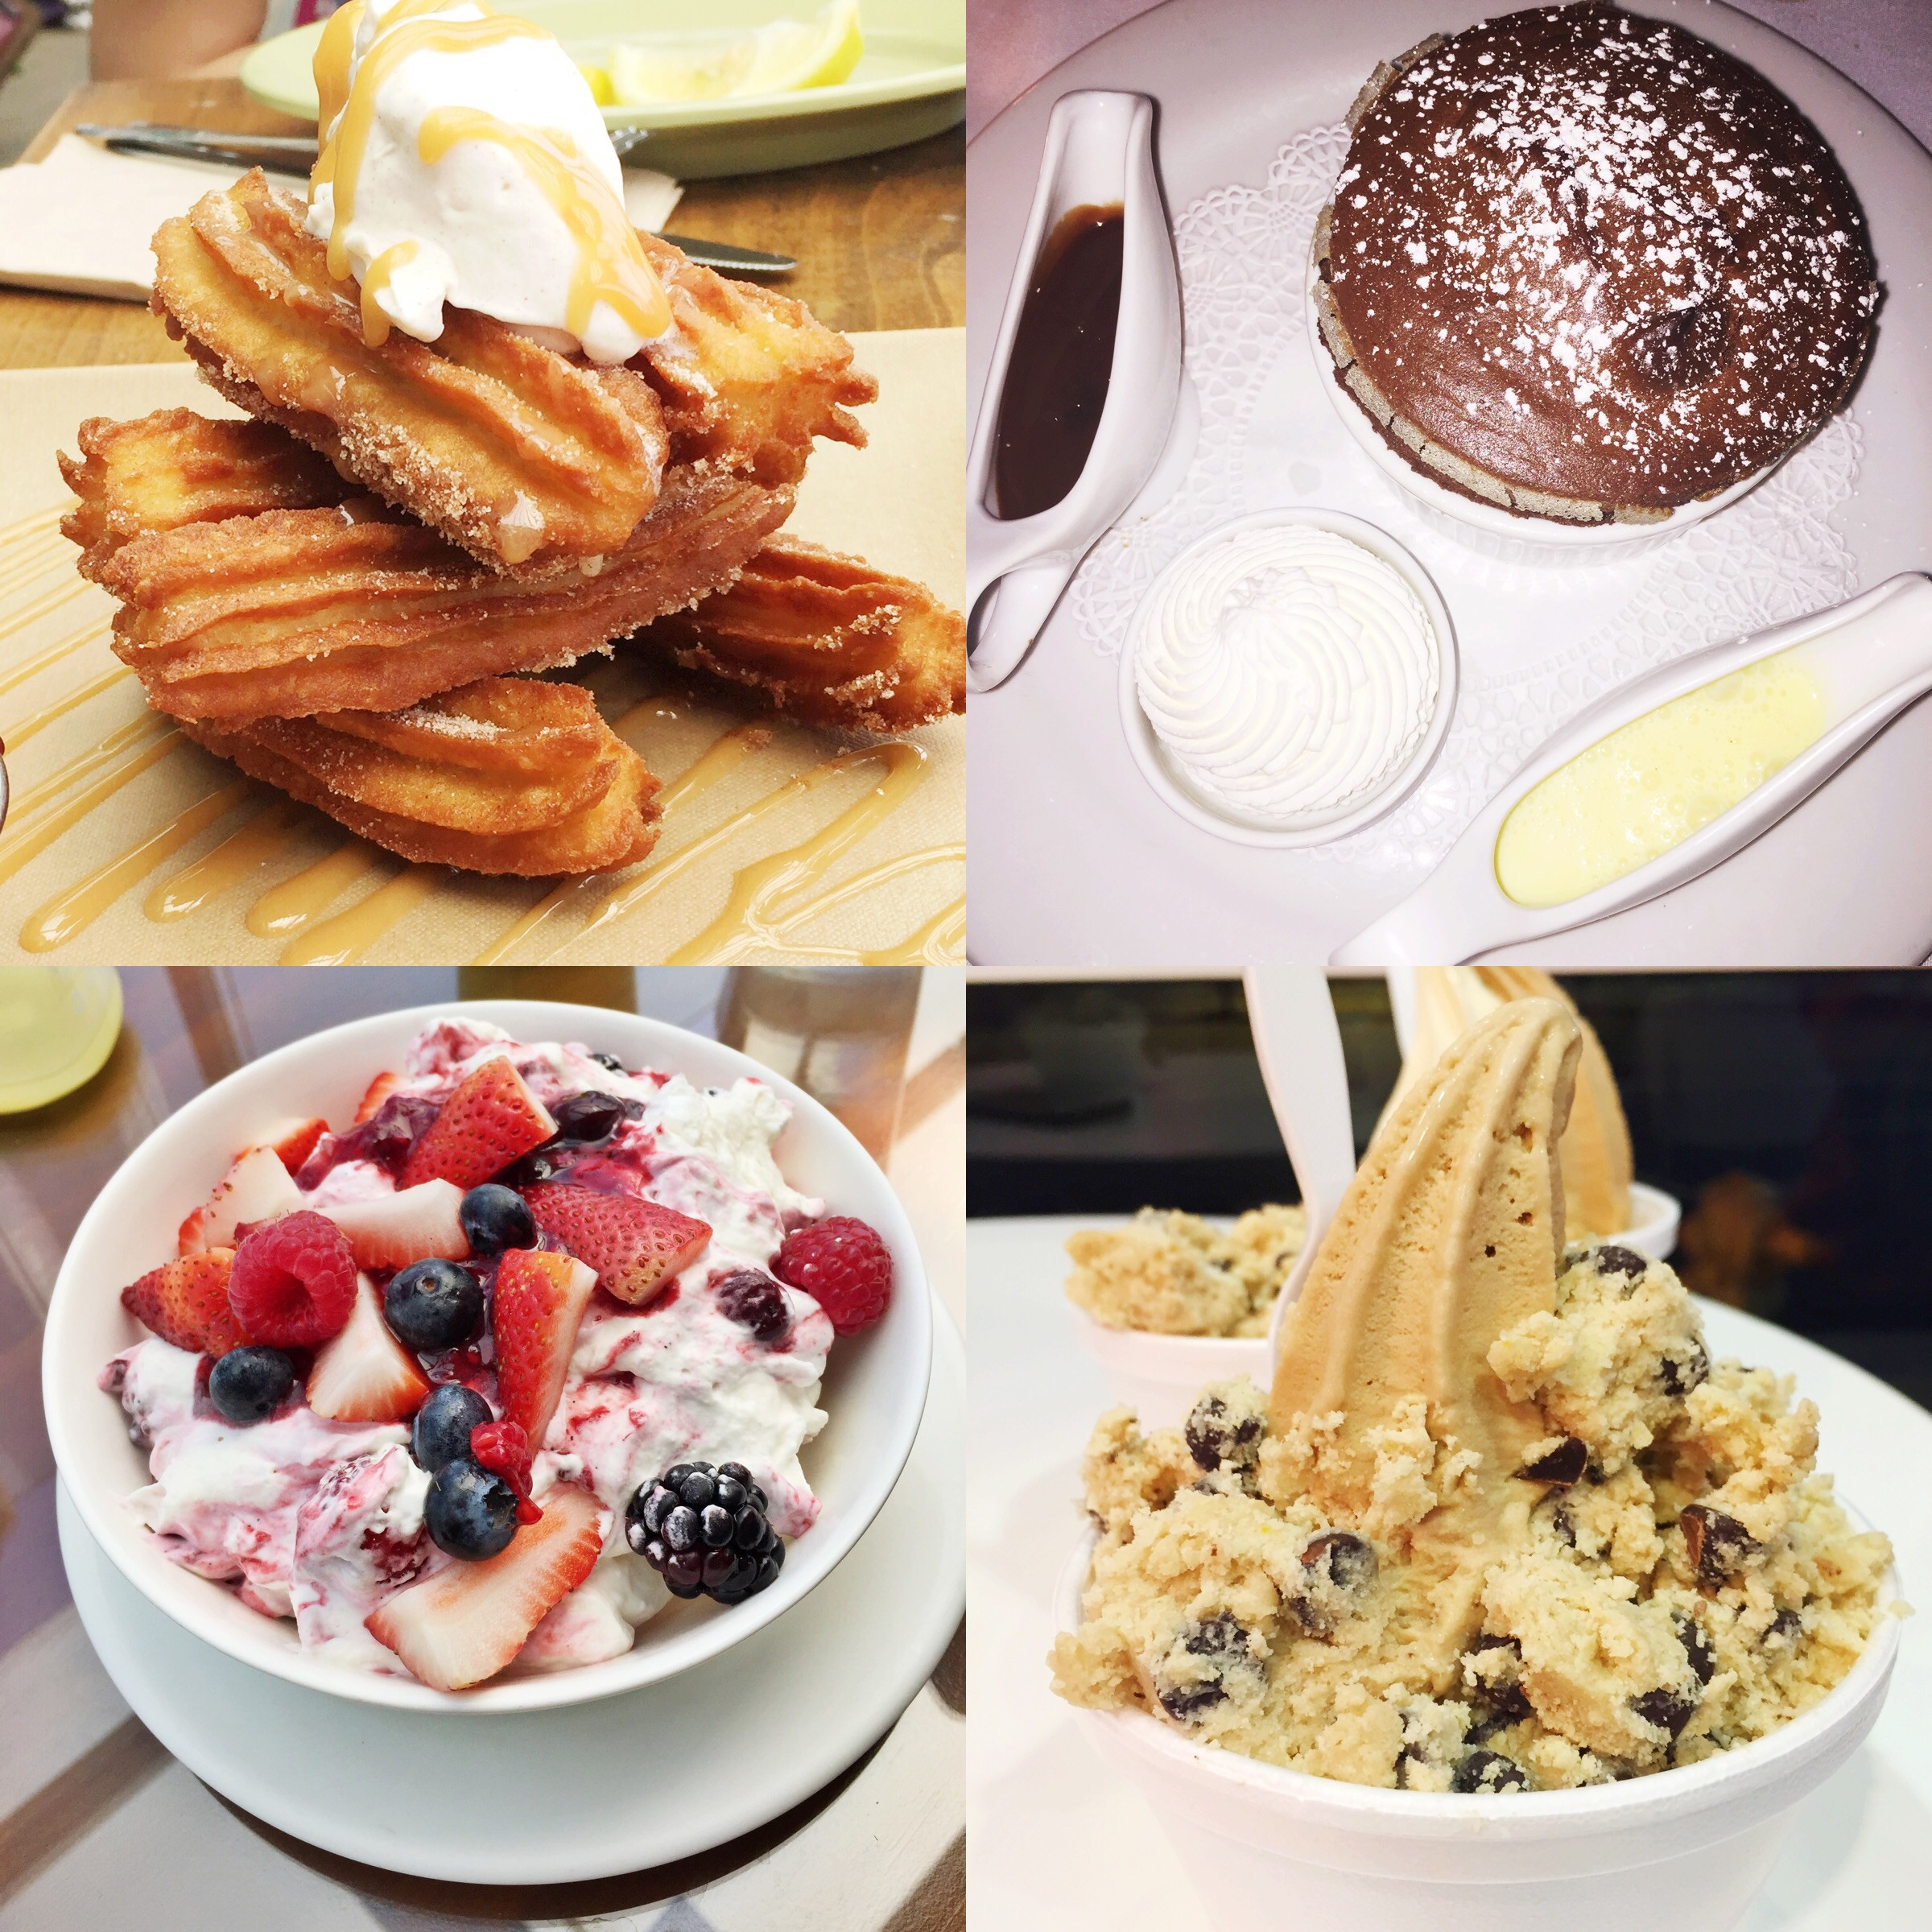 Places To Get Dessert
 10 favorite places to dessert in Los Angeles